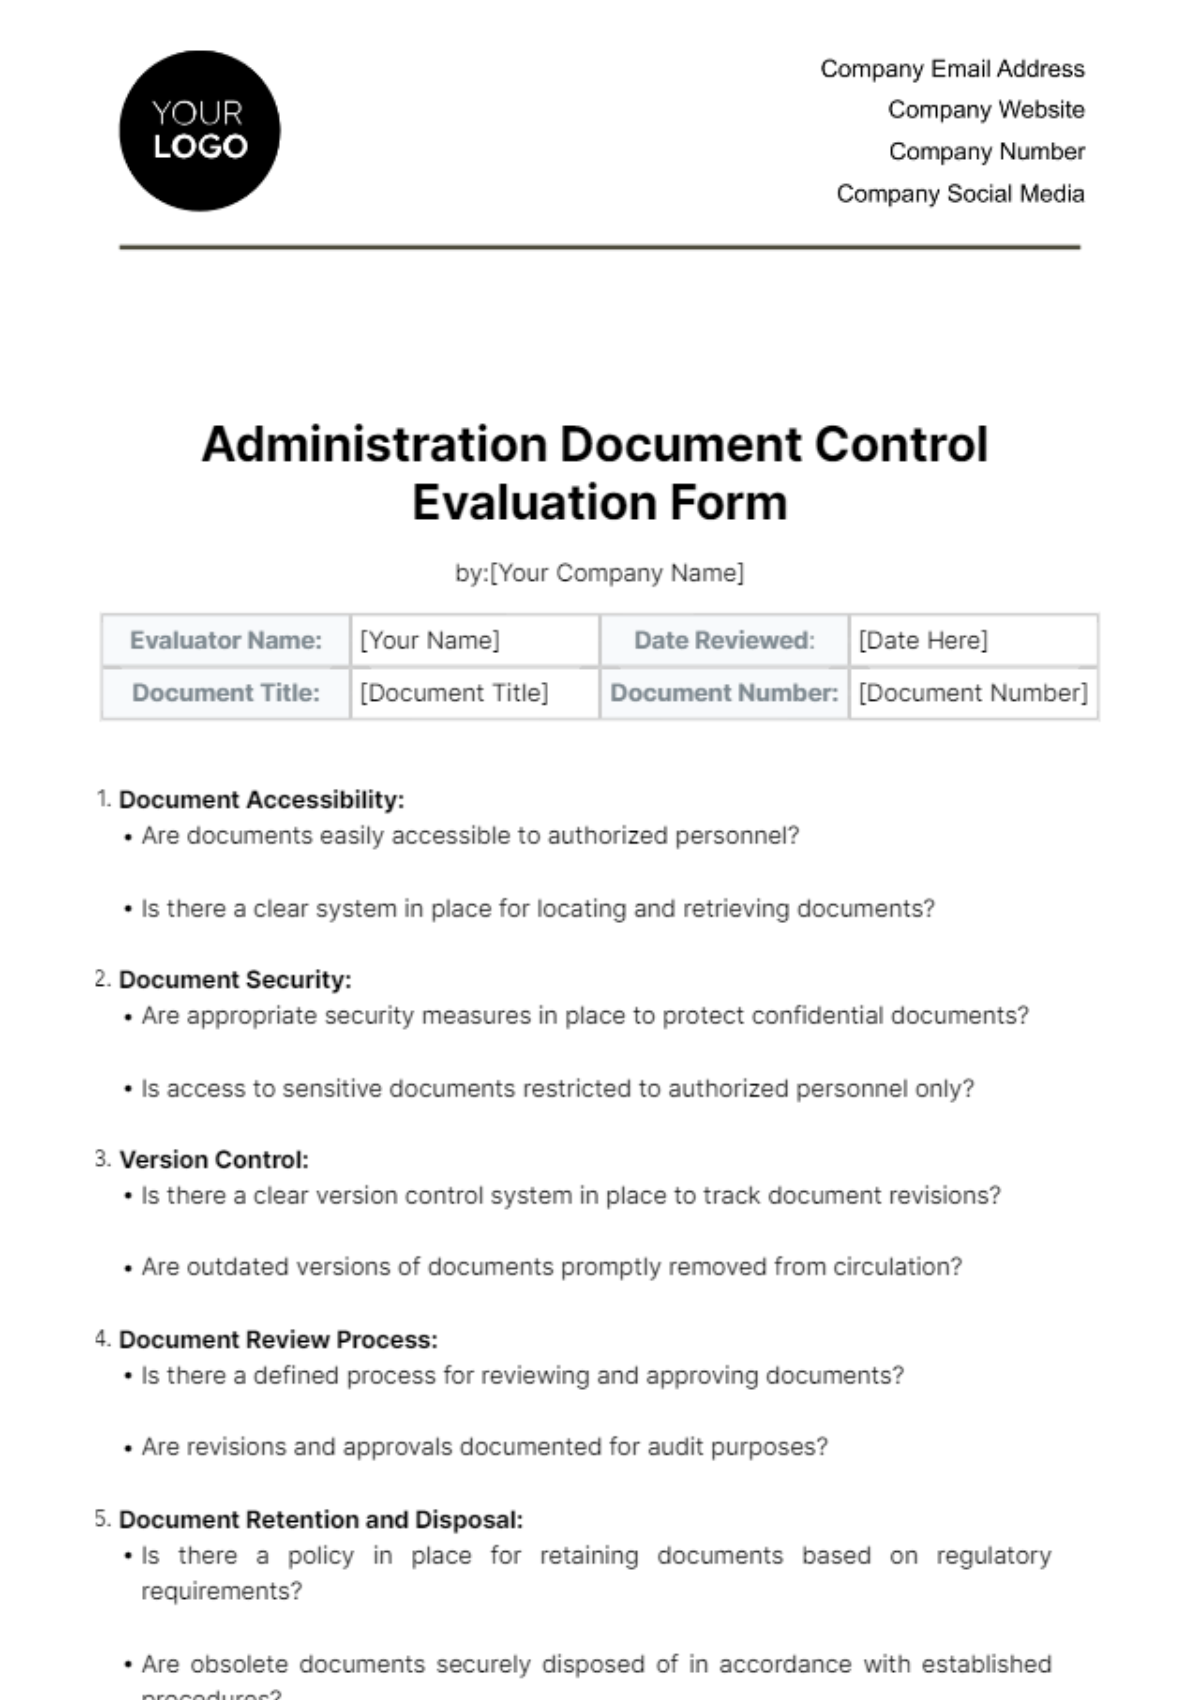 Free Administration Document Control Evaluation Form Template